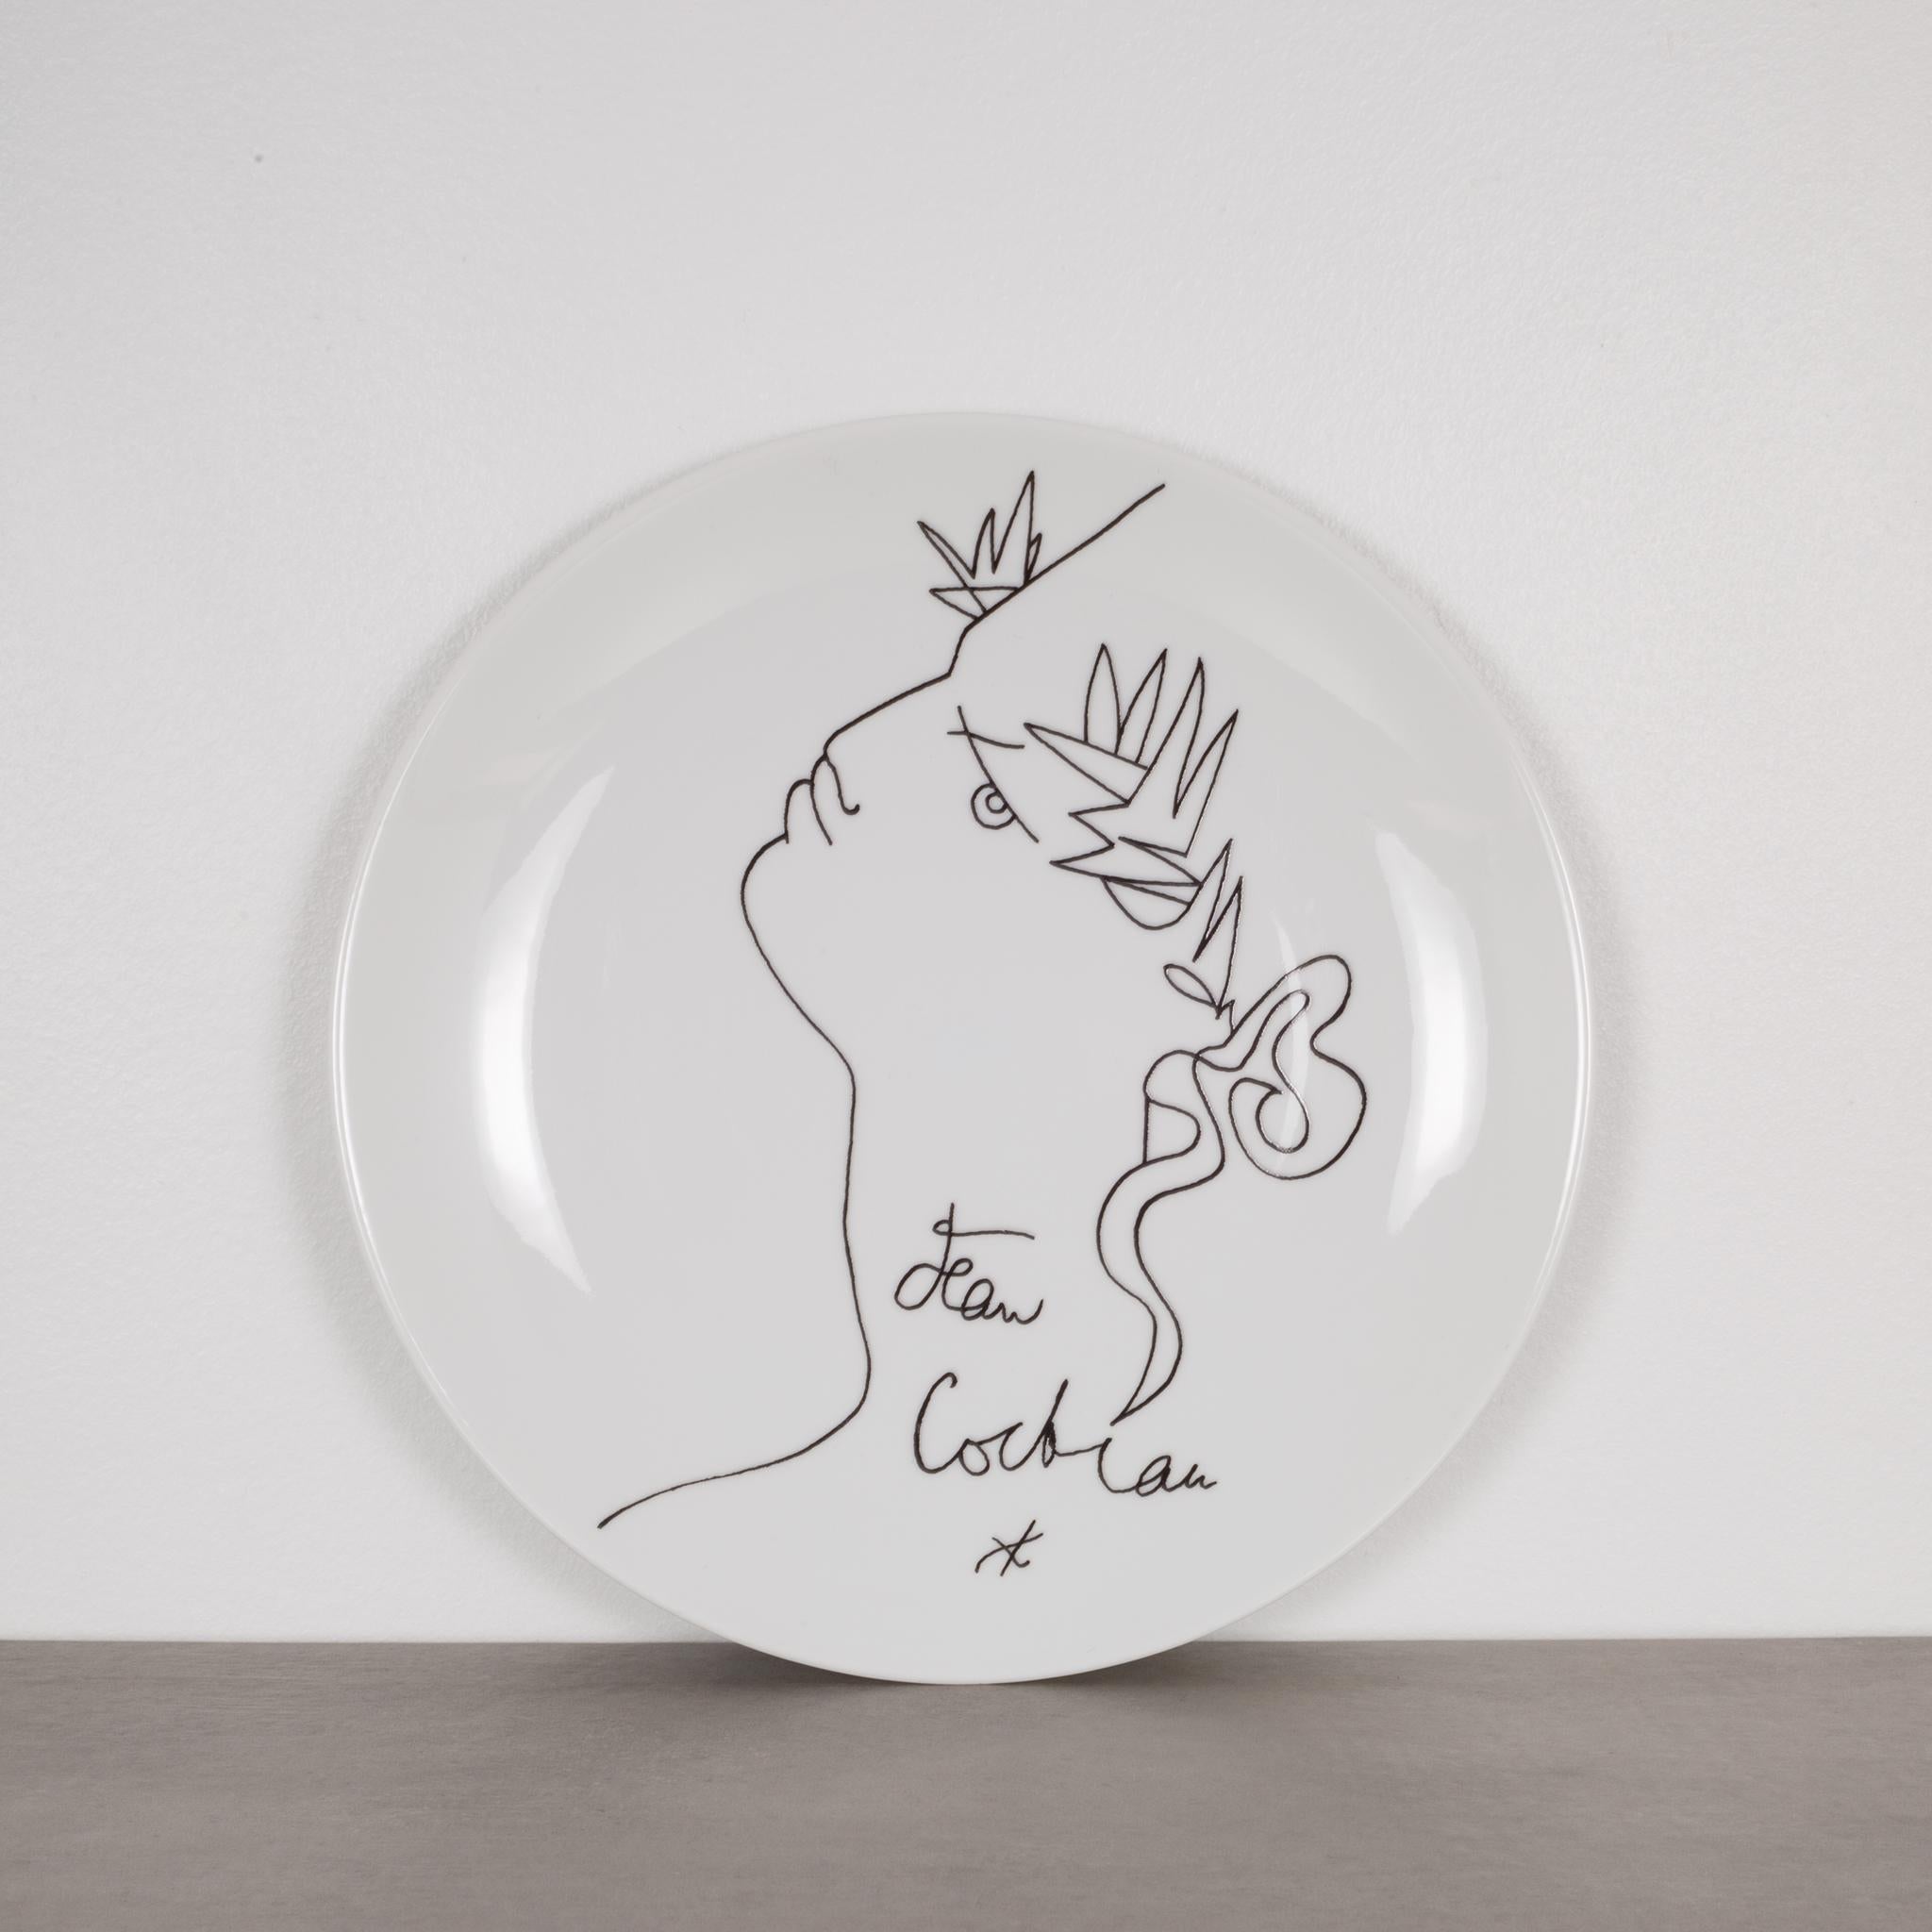 This listing is for a vintage ceramic plates designed by author, artist, filmmaker Jean Cocteau. The plate was issued by Promo-Ceram as part of an Editions d'art series, and is noted as 